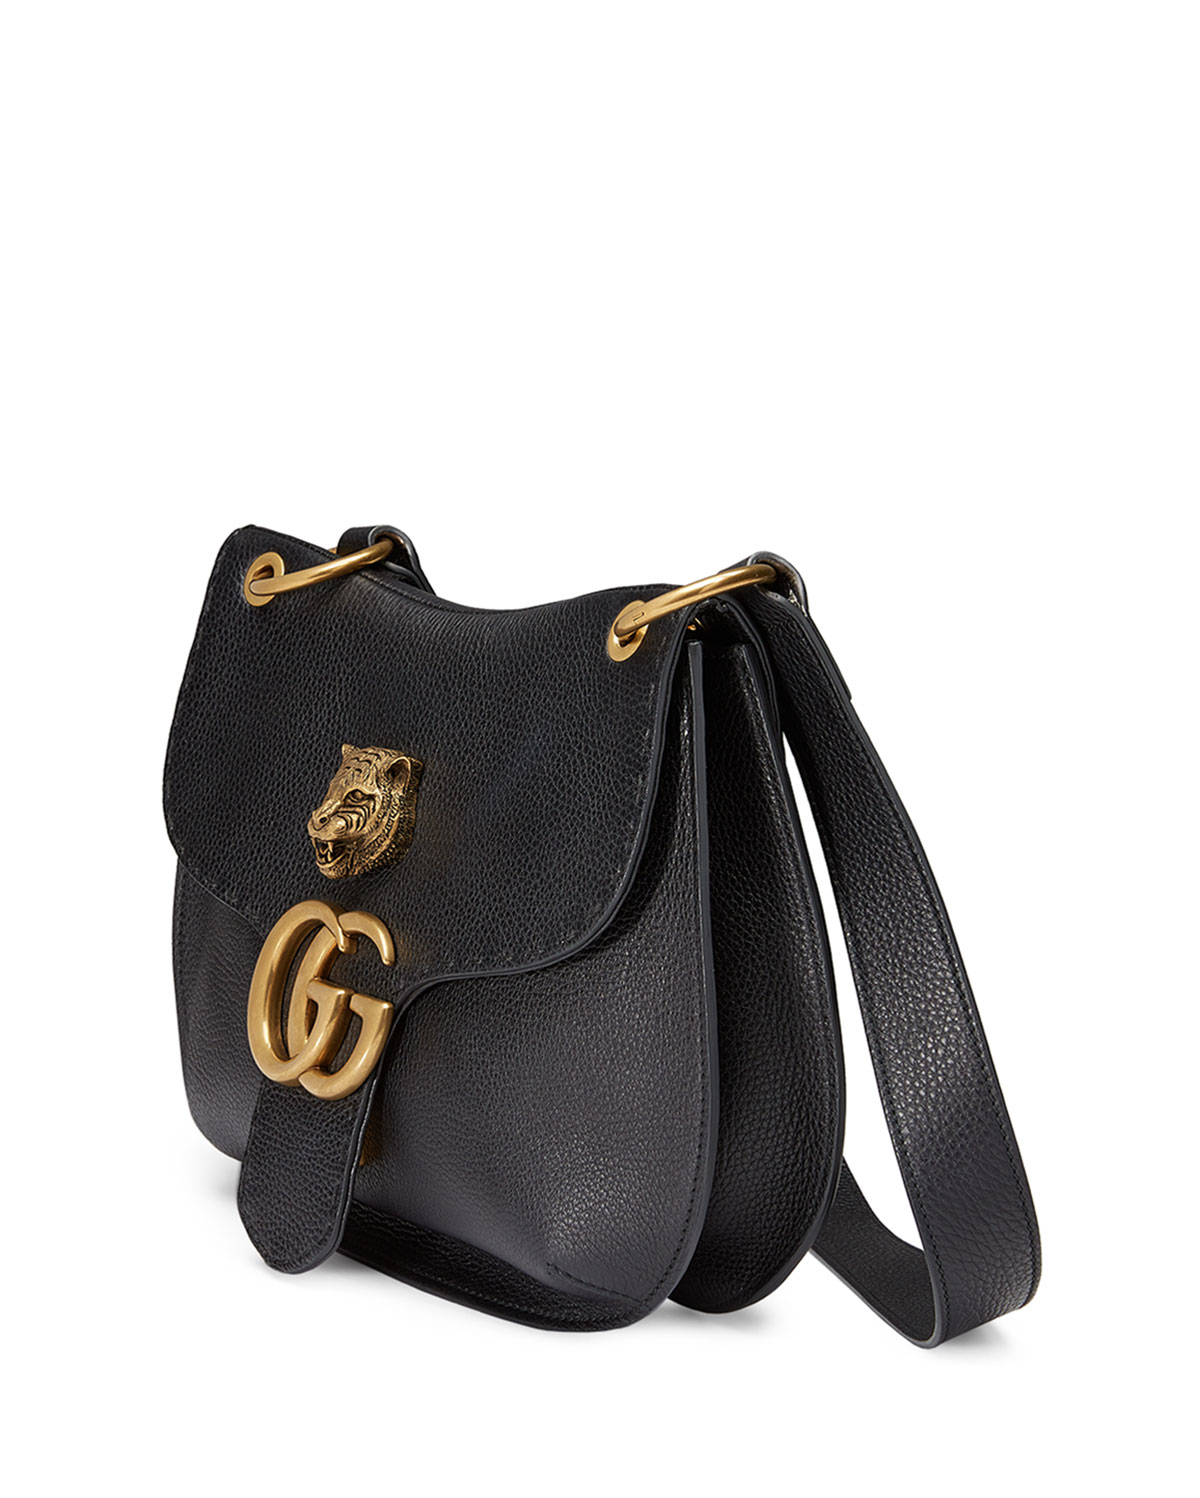 gucci purse with lion head